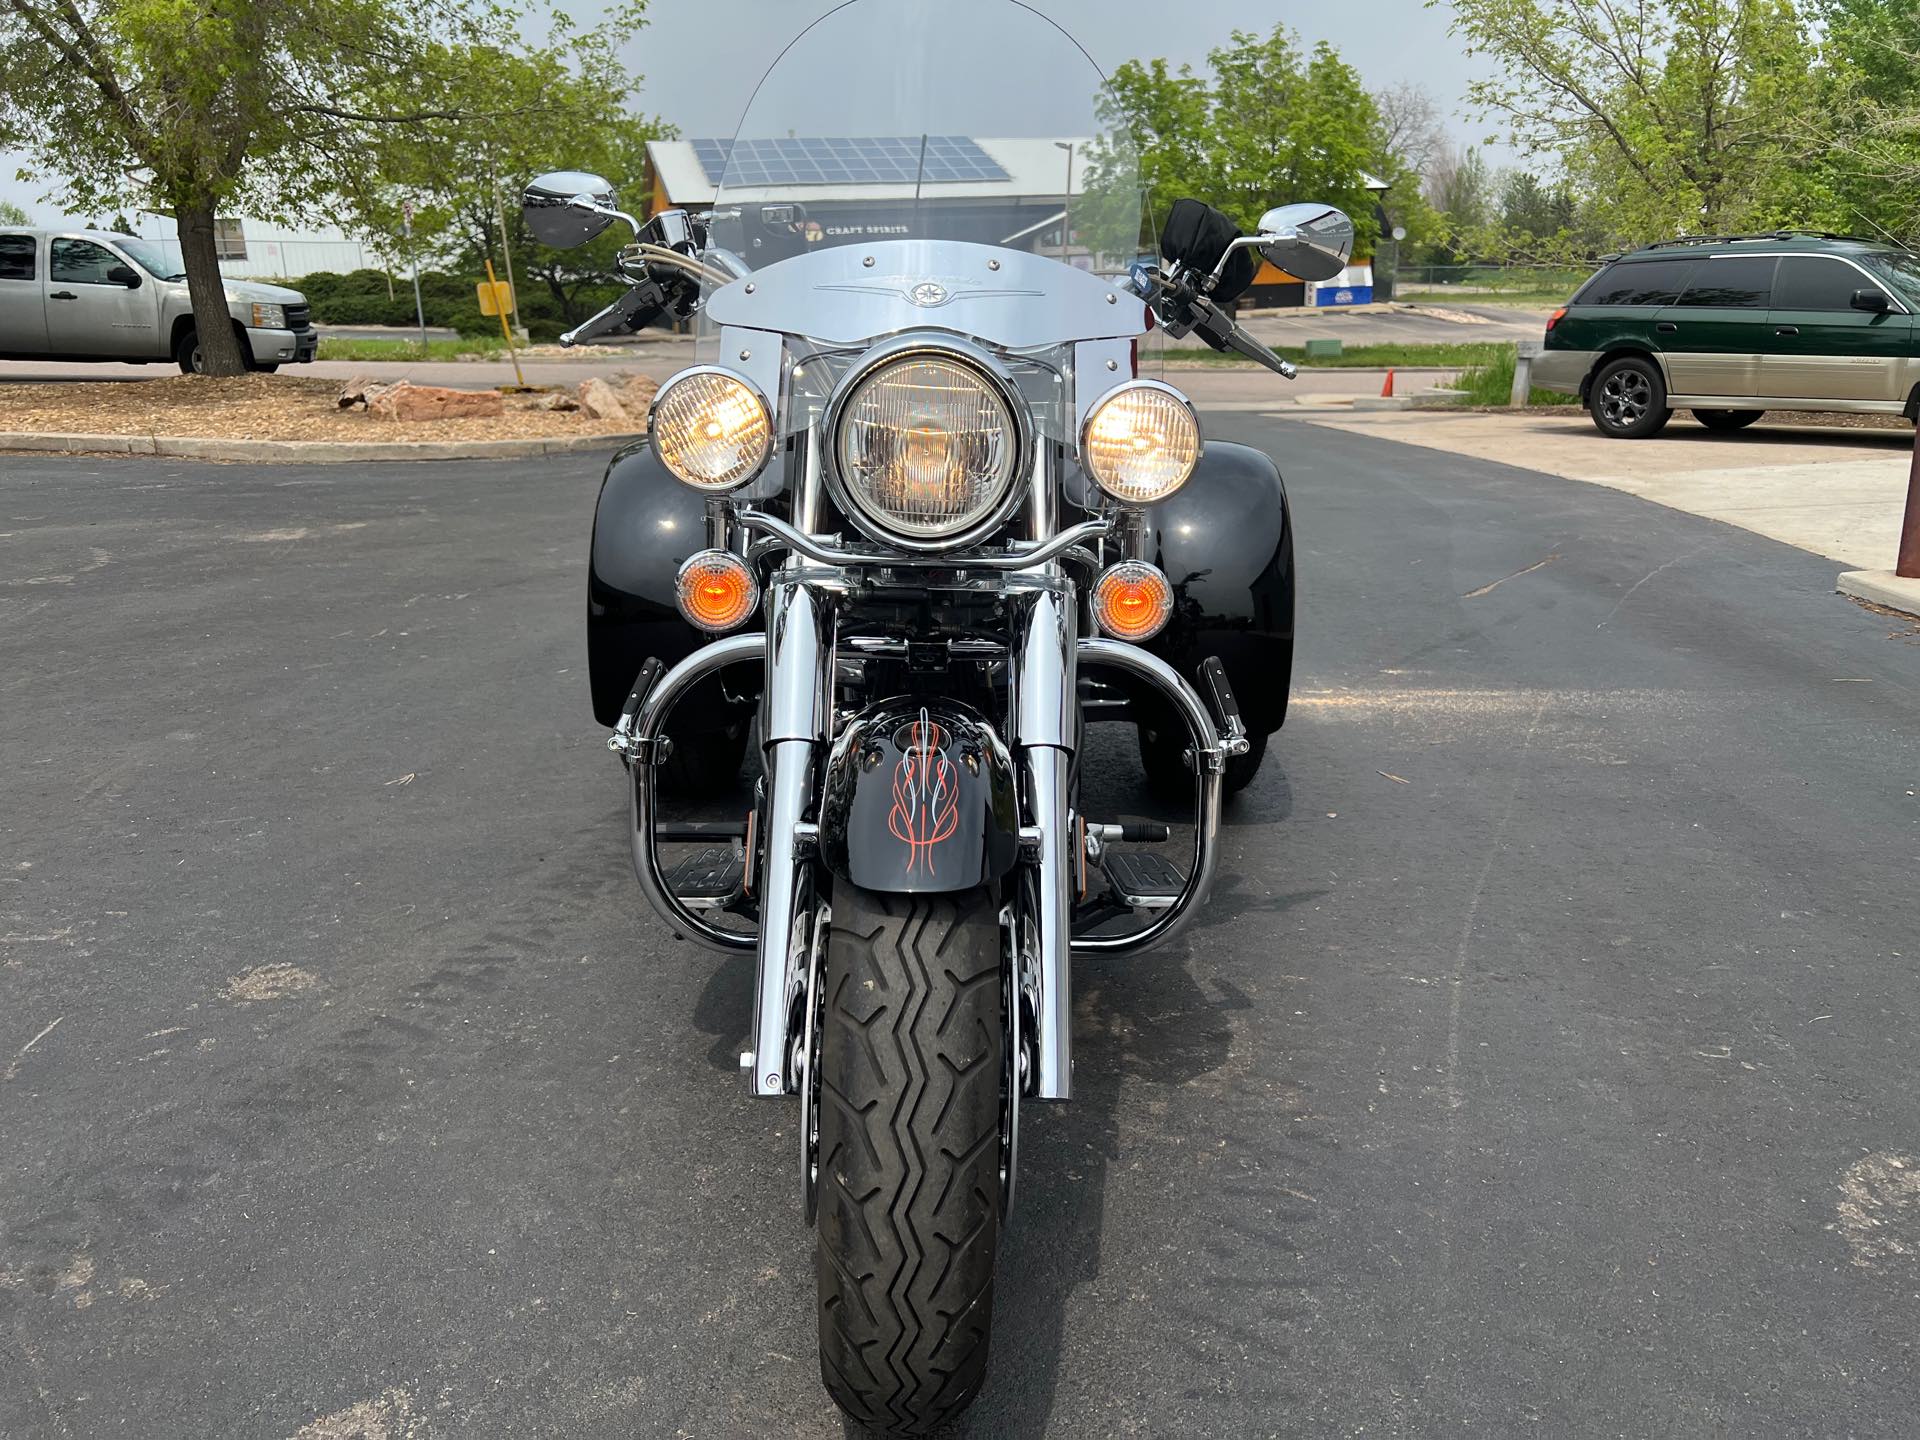 2007 YAMAHA XV17AS TRIKE at Aces Motorcycles - Fort Collins